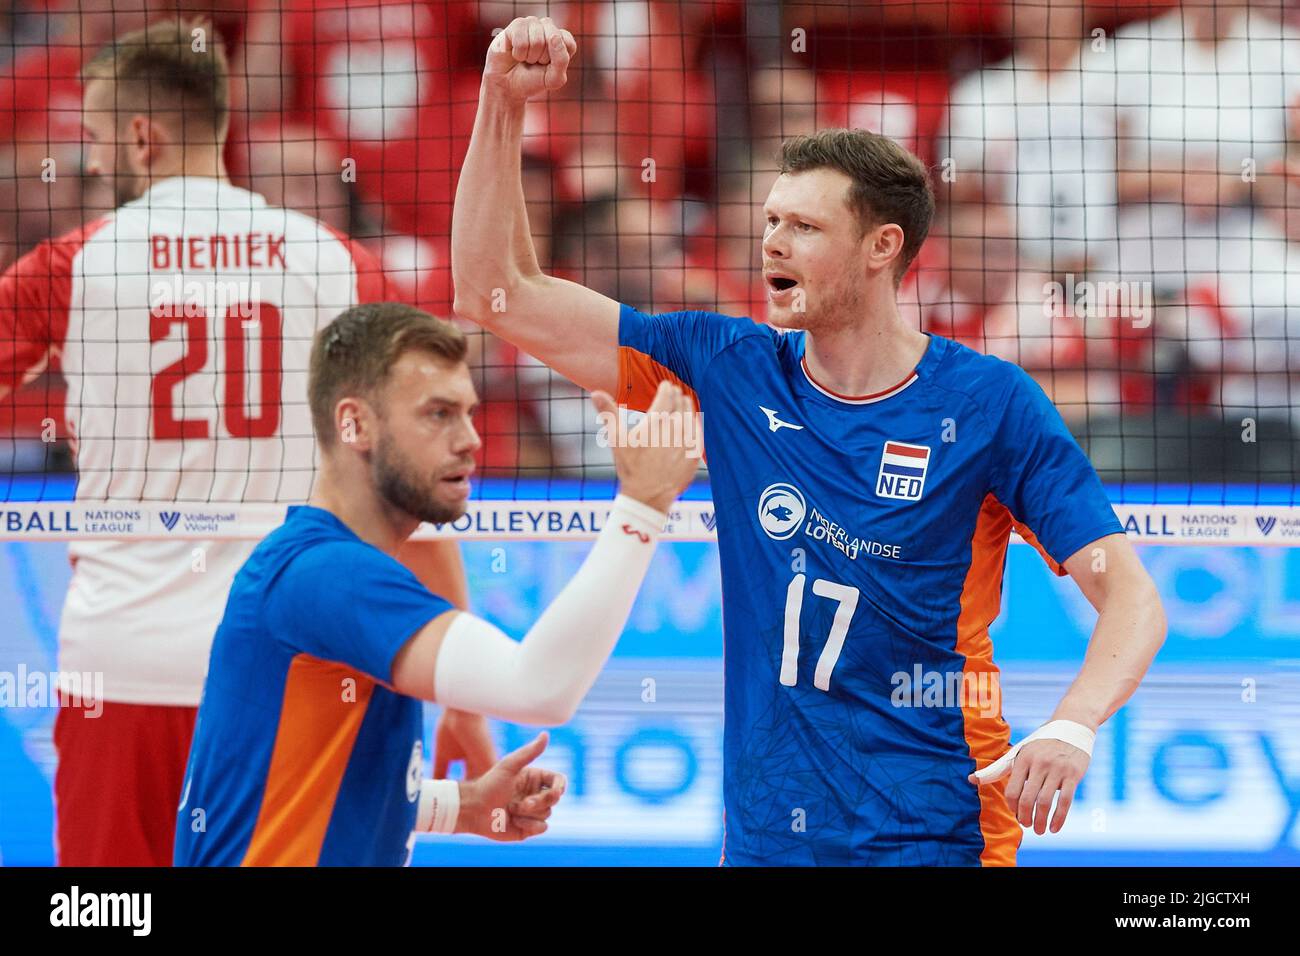 Bennie Junior Tuinstra (L) and Michael Parkinson (R) of the Netherlands during the 2022 men's FIVB Volleyball Nations League match between Poland and the Netherlands in Gdansk, Poland, 09 July 2022. Stock Photo